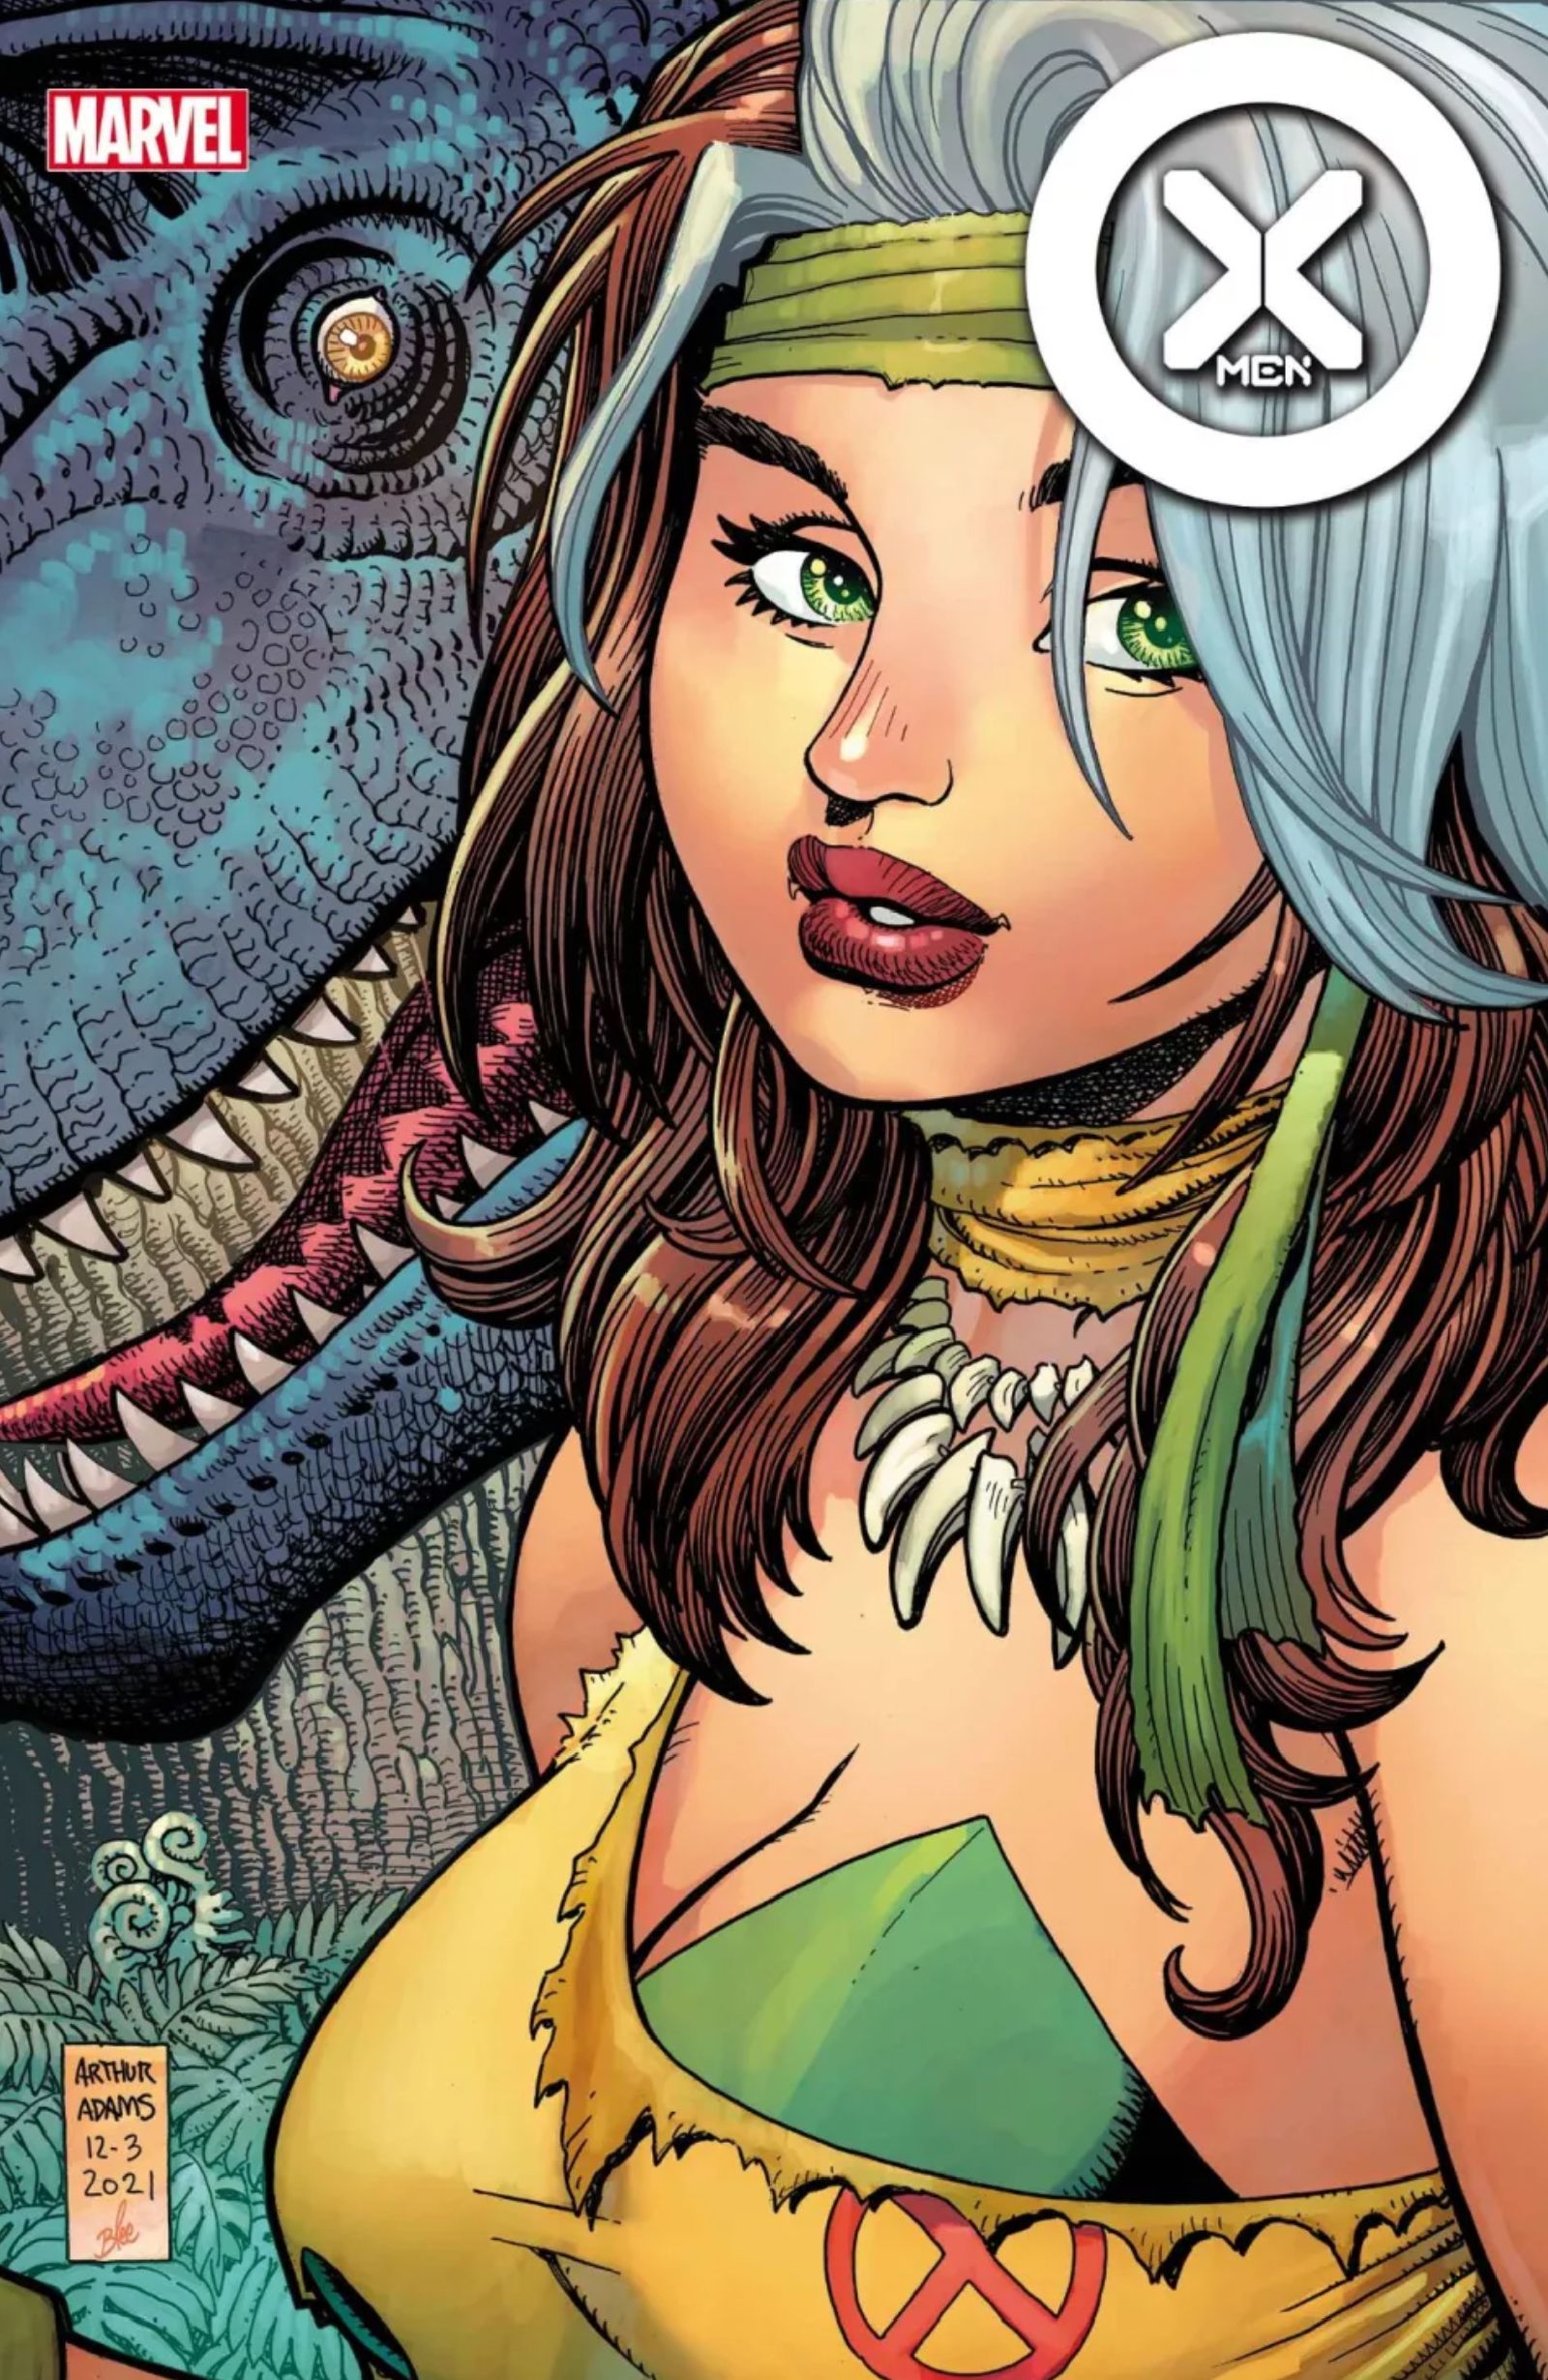 Rogue’s Savage Land Costume Returns in Comic Art Tribute to Iconic Outfit